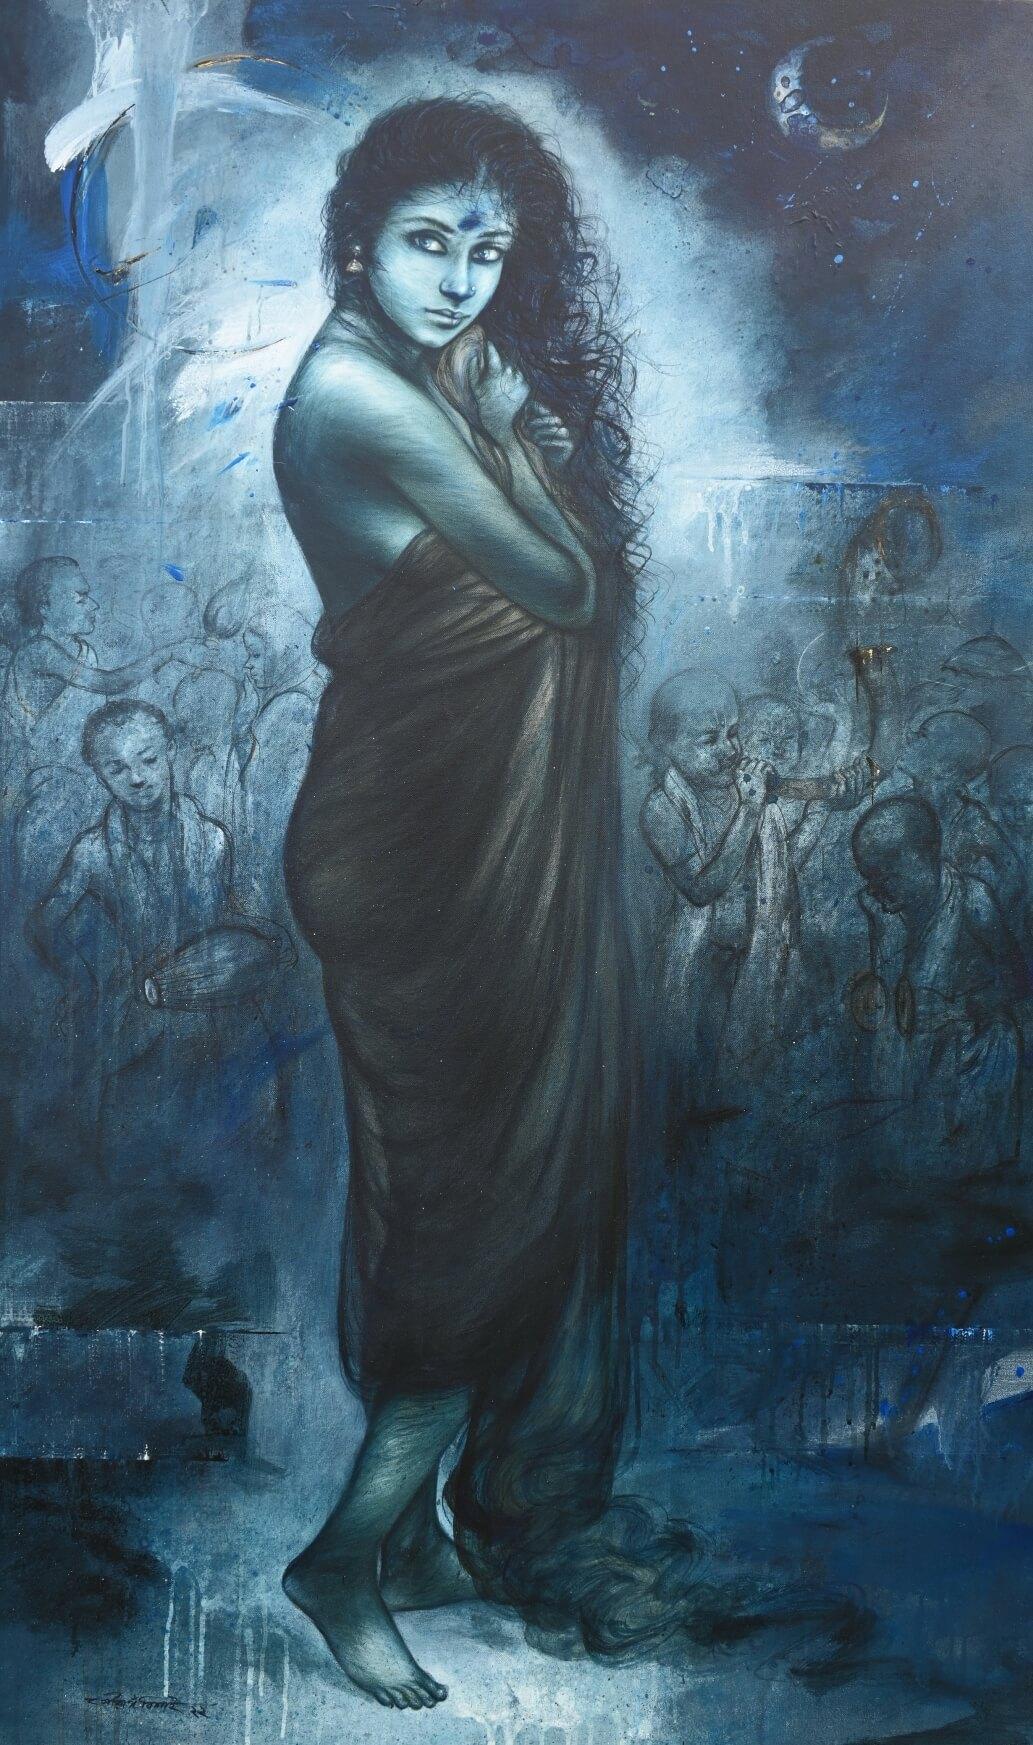 Gaurango Beshai  Figurative Painting - Devotee, Acrylic on Canvas, Blue Color by Contemporary Indian Artist “In Stock”